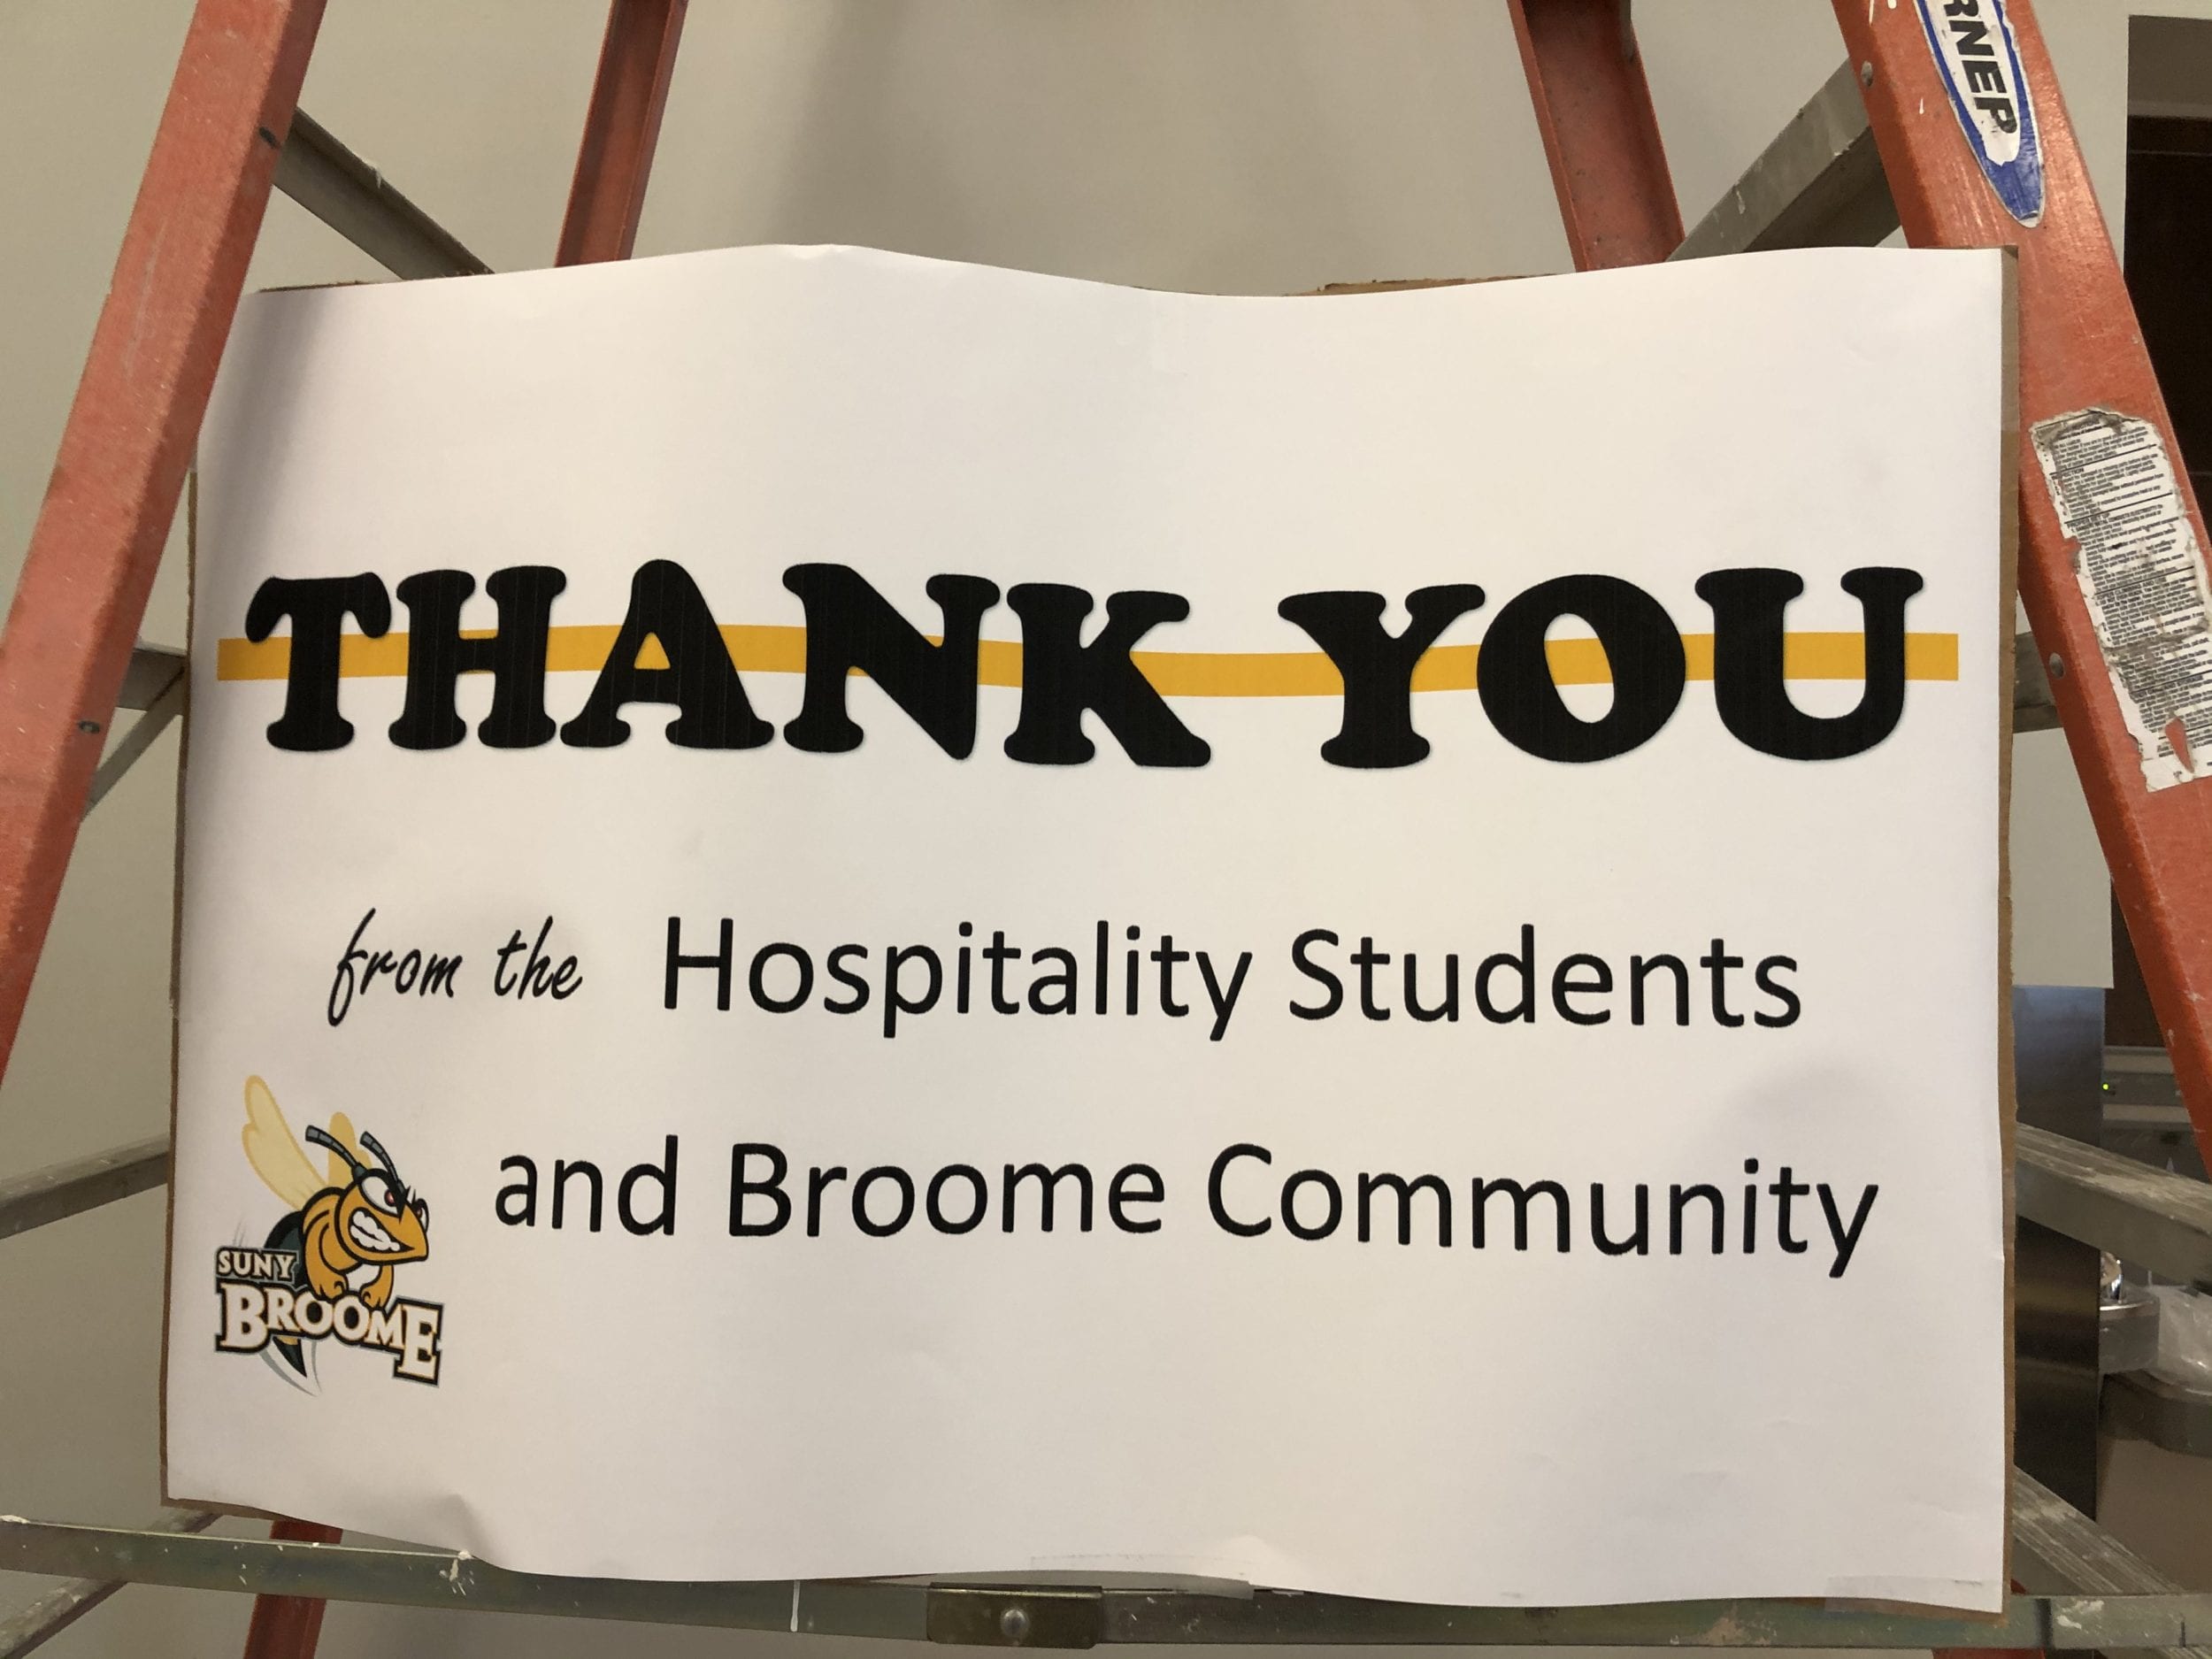 Thank you from the Hospitality students